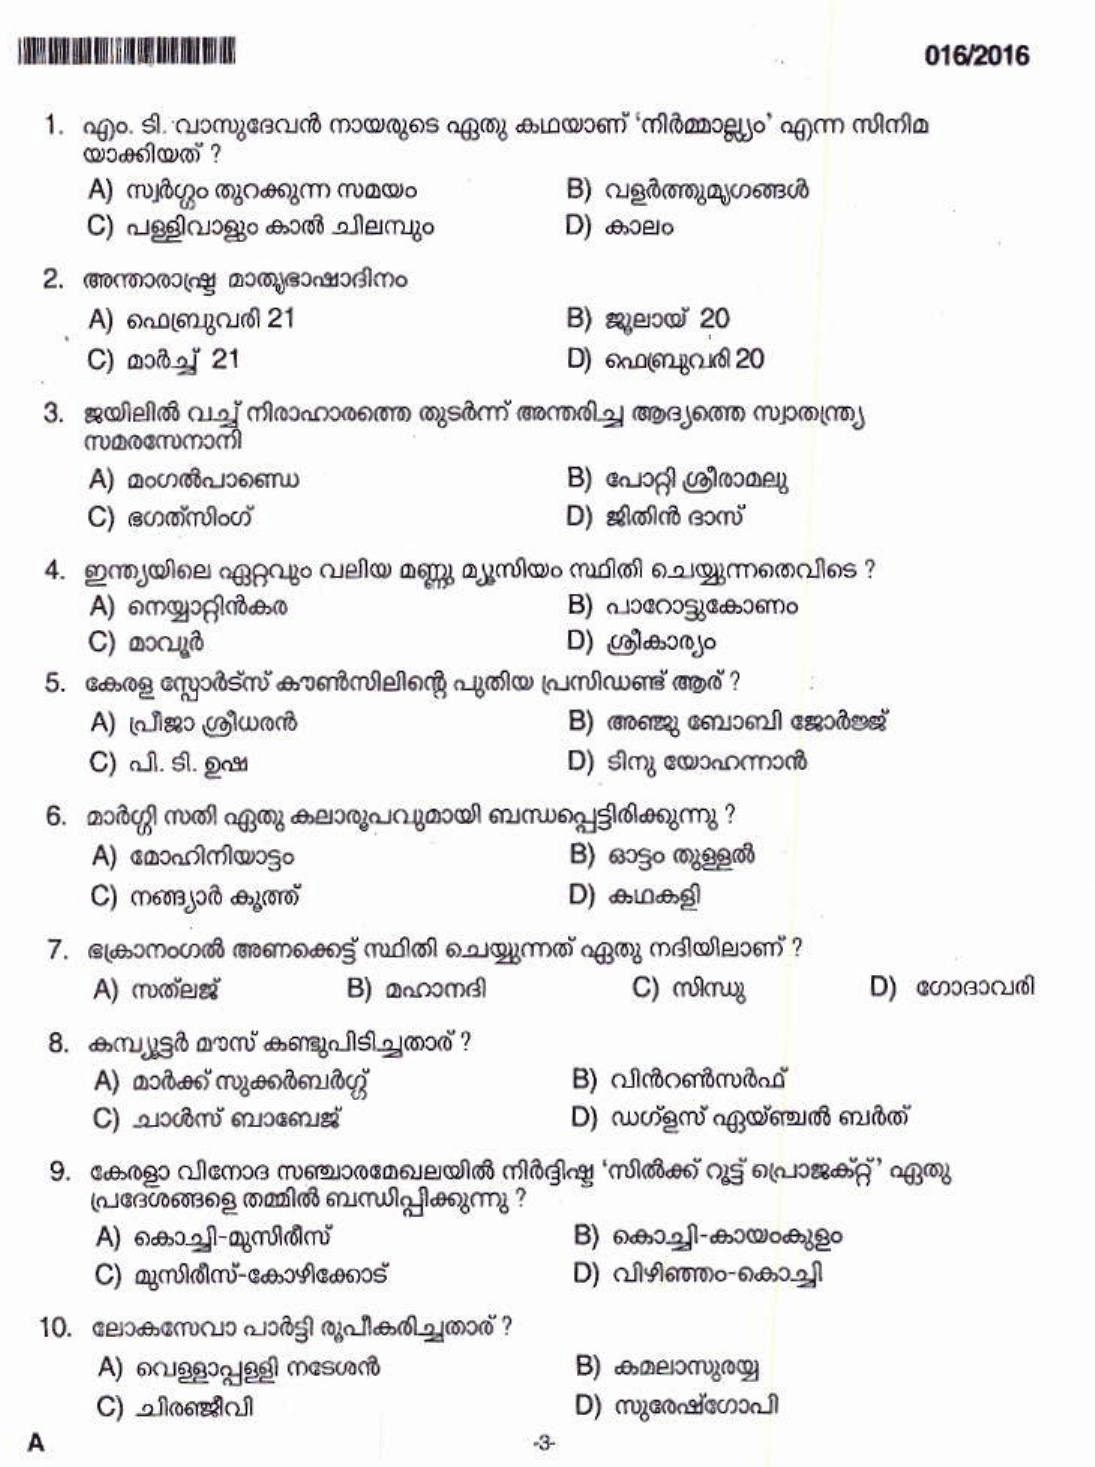 Teacher (16/2016) Question Paper with Answer Key - Kerala PSC